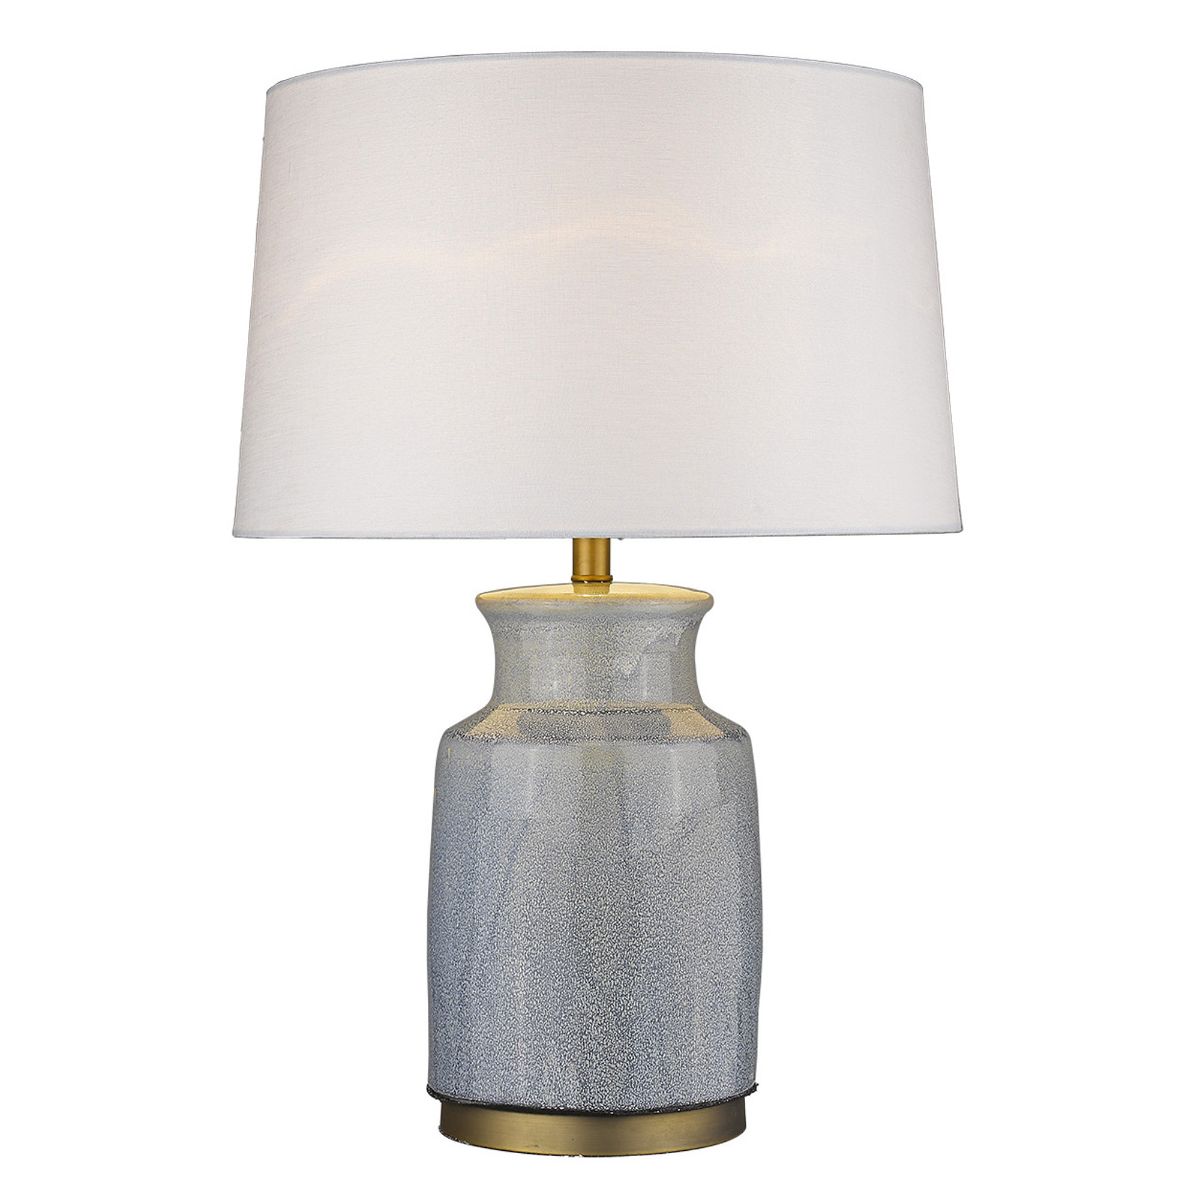 Trend Home 1 Light Table Lamp Silver Mist Ceramic Body and Brass Accents